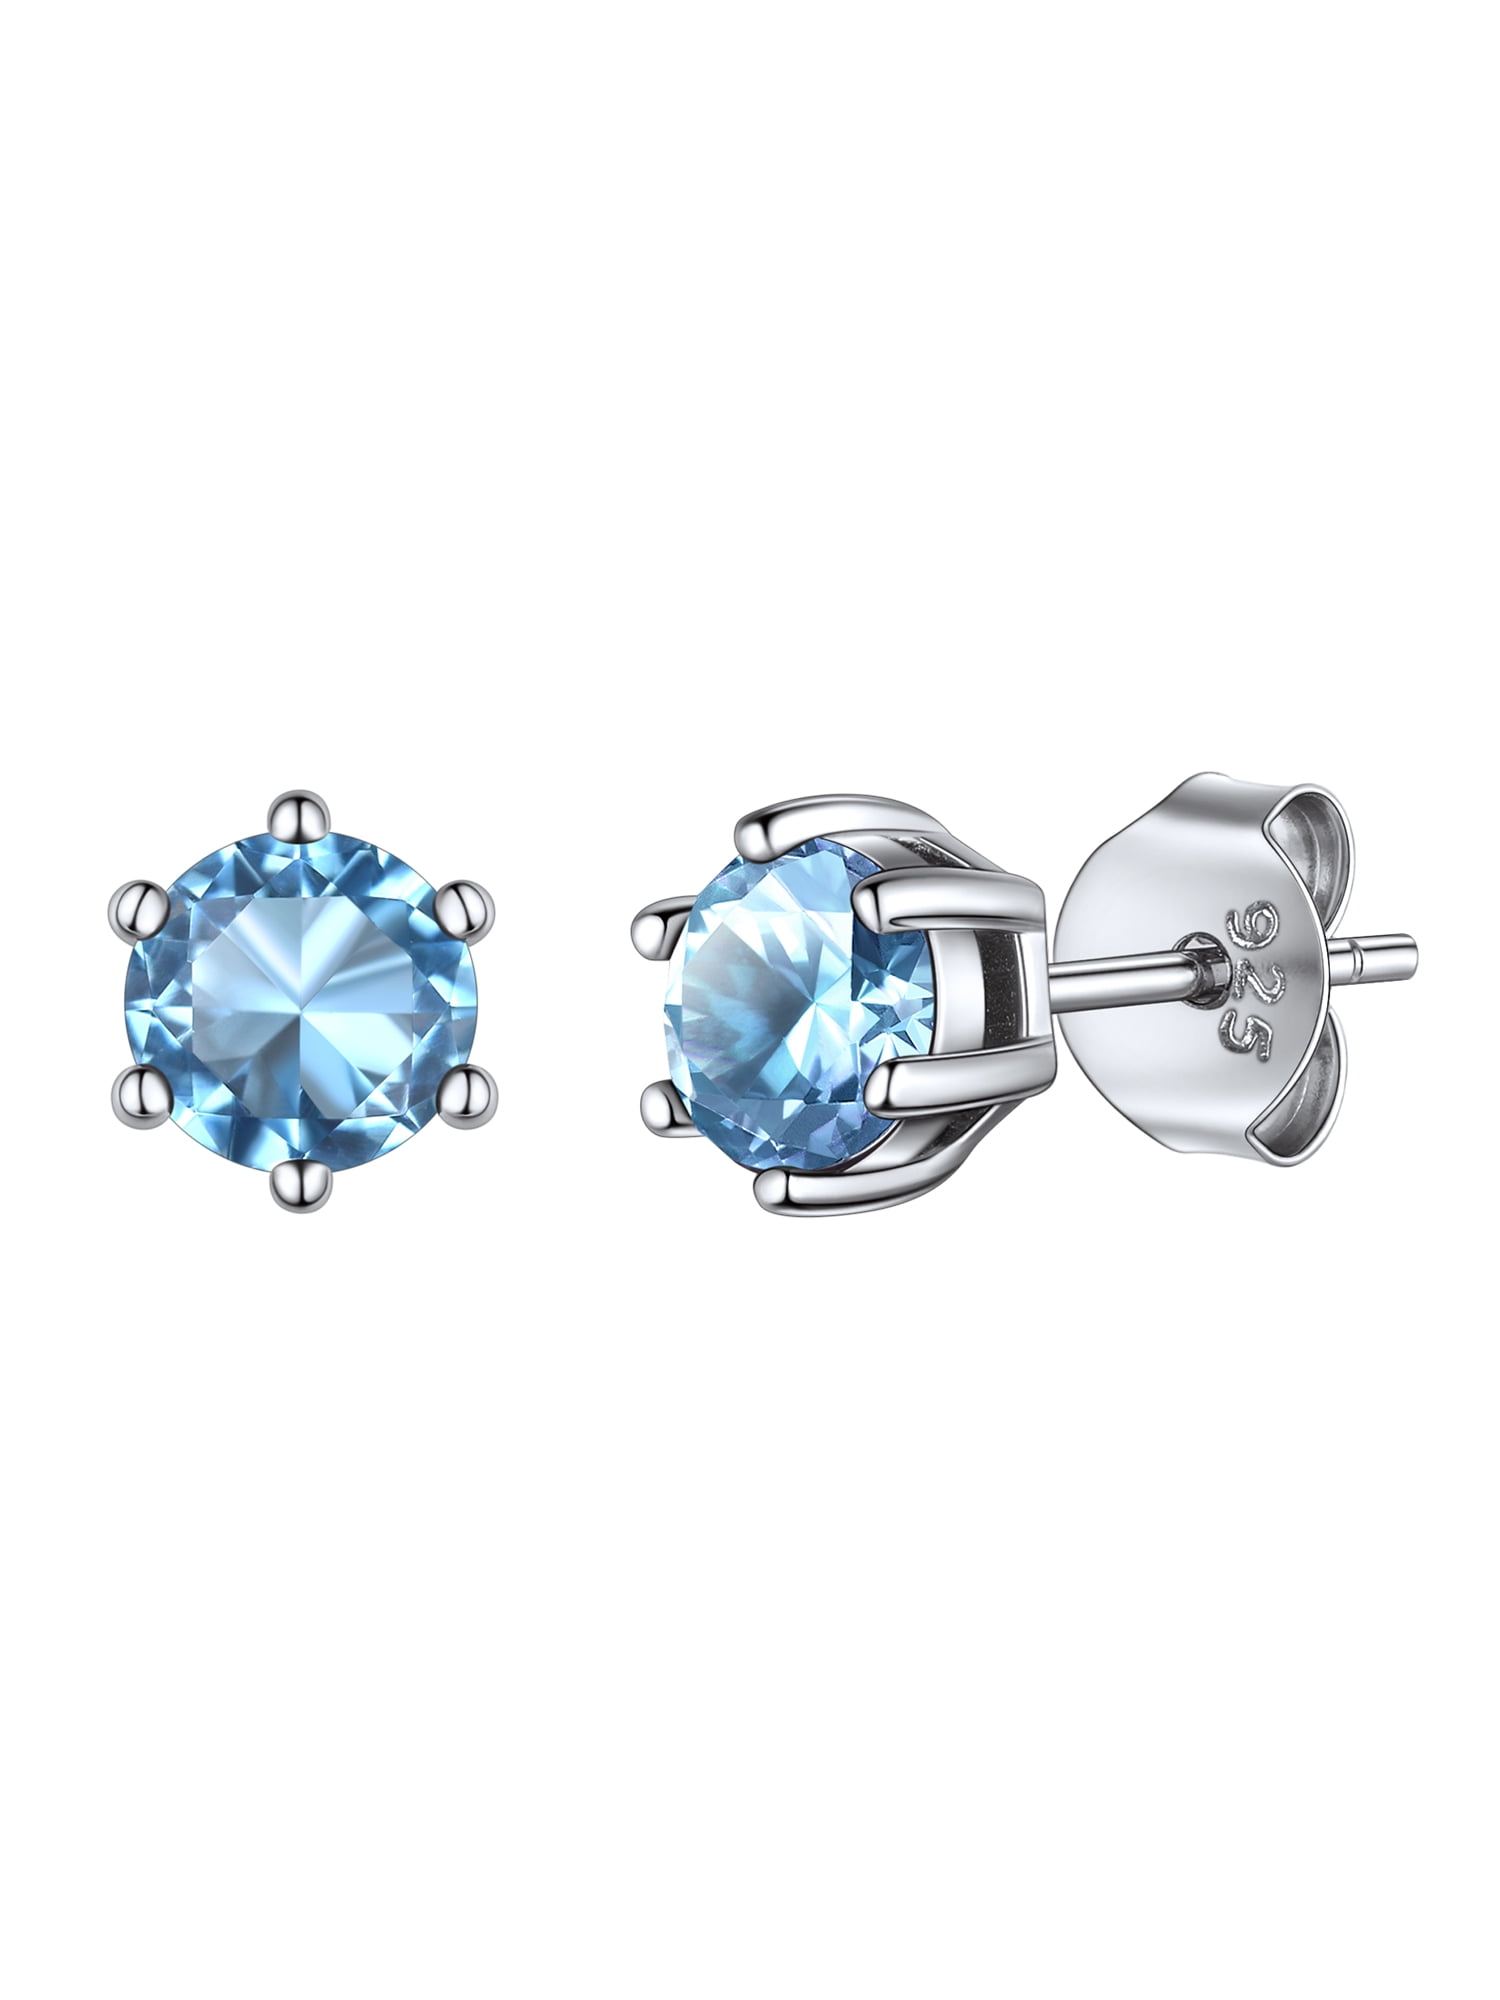 ChicSilver March Birthstone Jewelry for Women 925 Sterling Silver Round Cut  Aquamarine Stud Earrings Dainty Small Studs Earrings